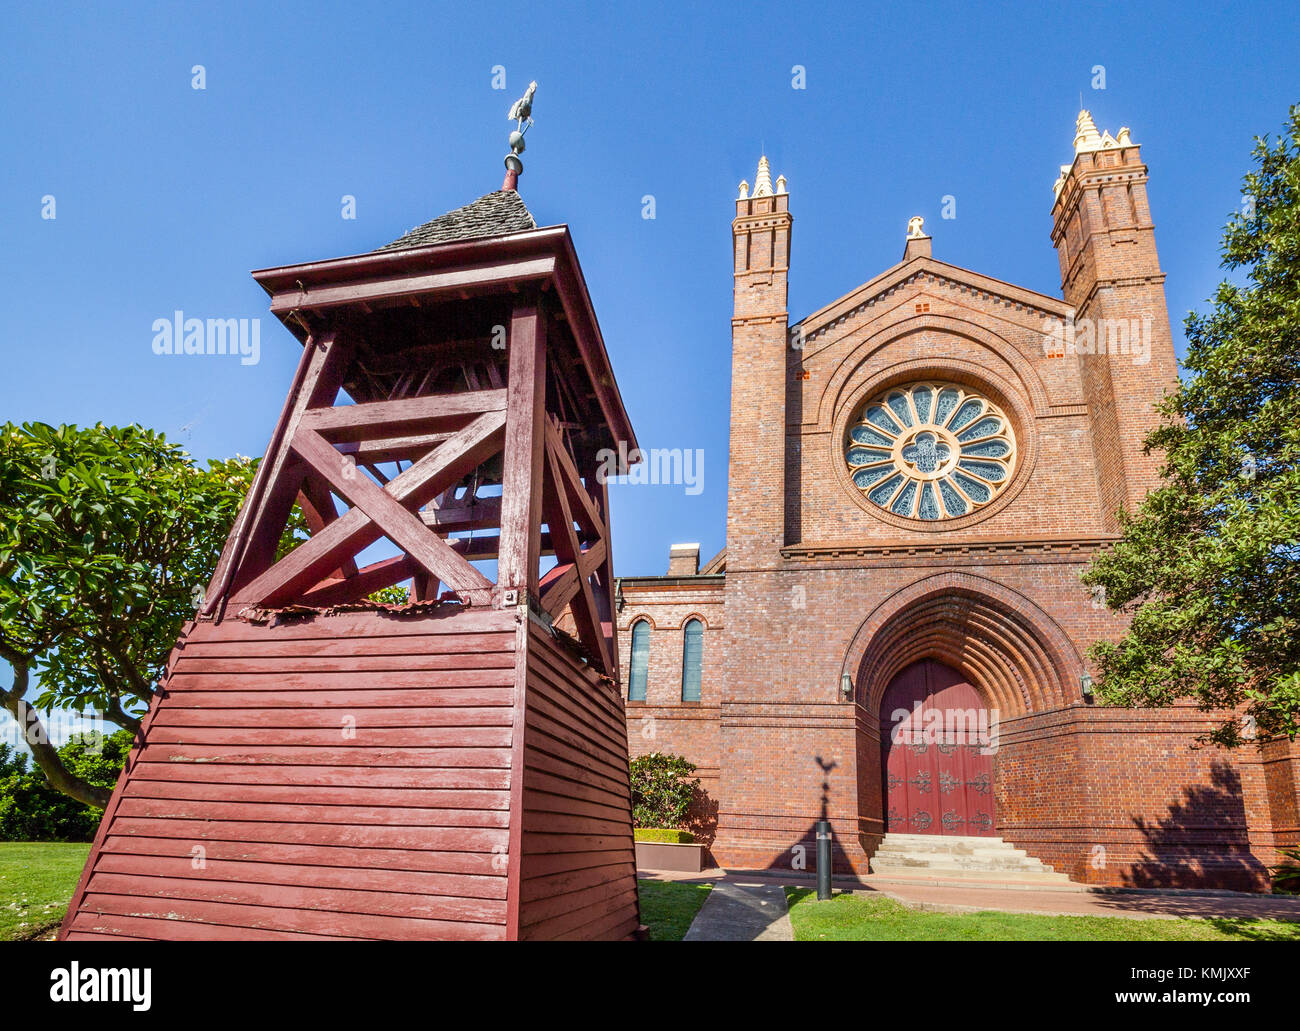 Australia, New South Wales, Newcastle, view of Gothic Revival style Christ Church Cathedral (or Cathedral Church of Christ the King) Stock Photo